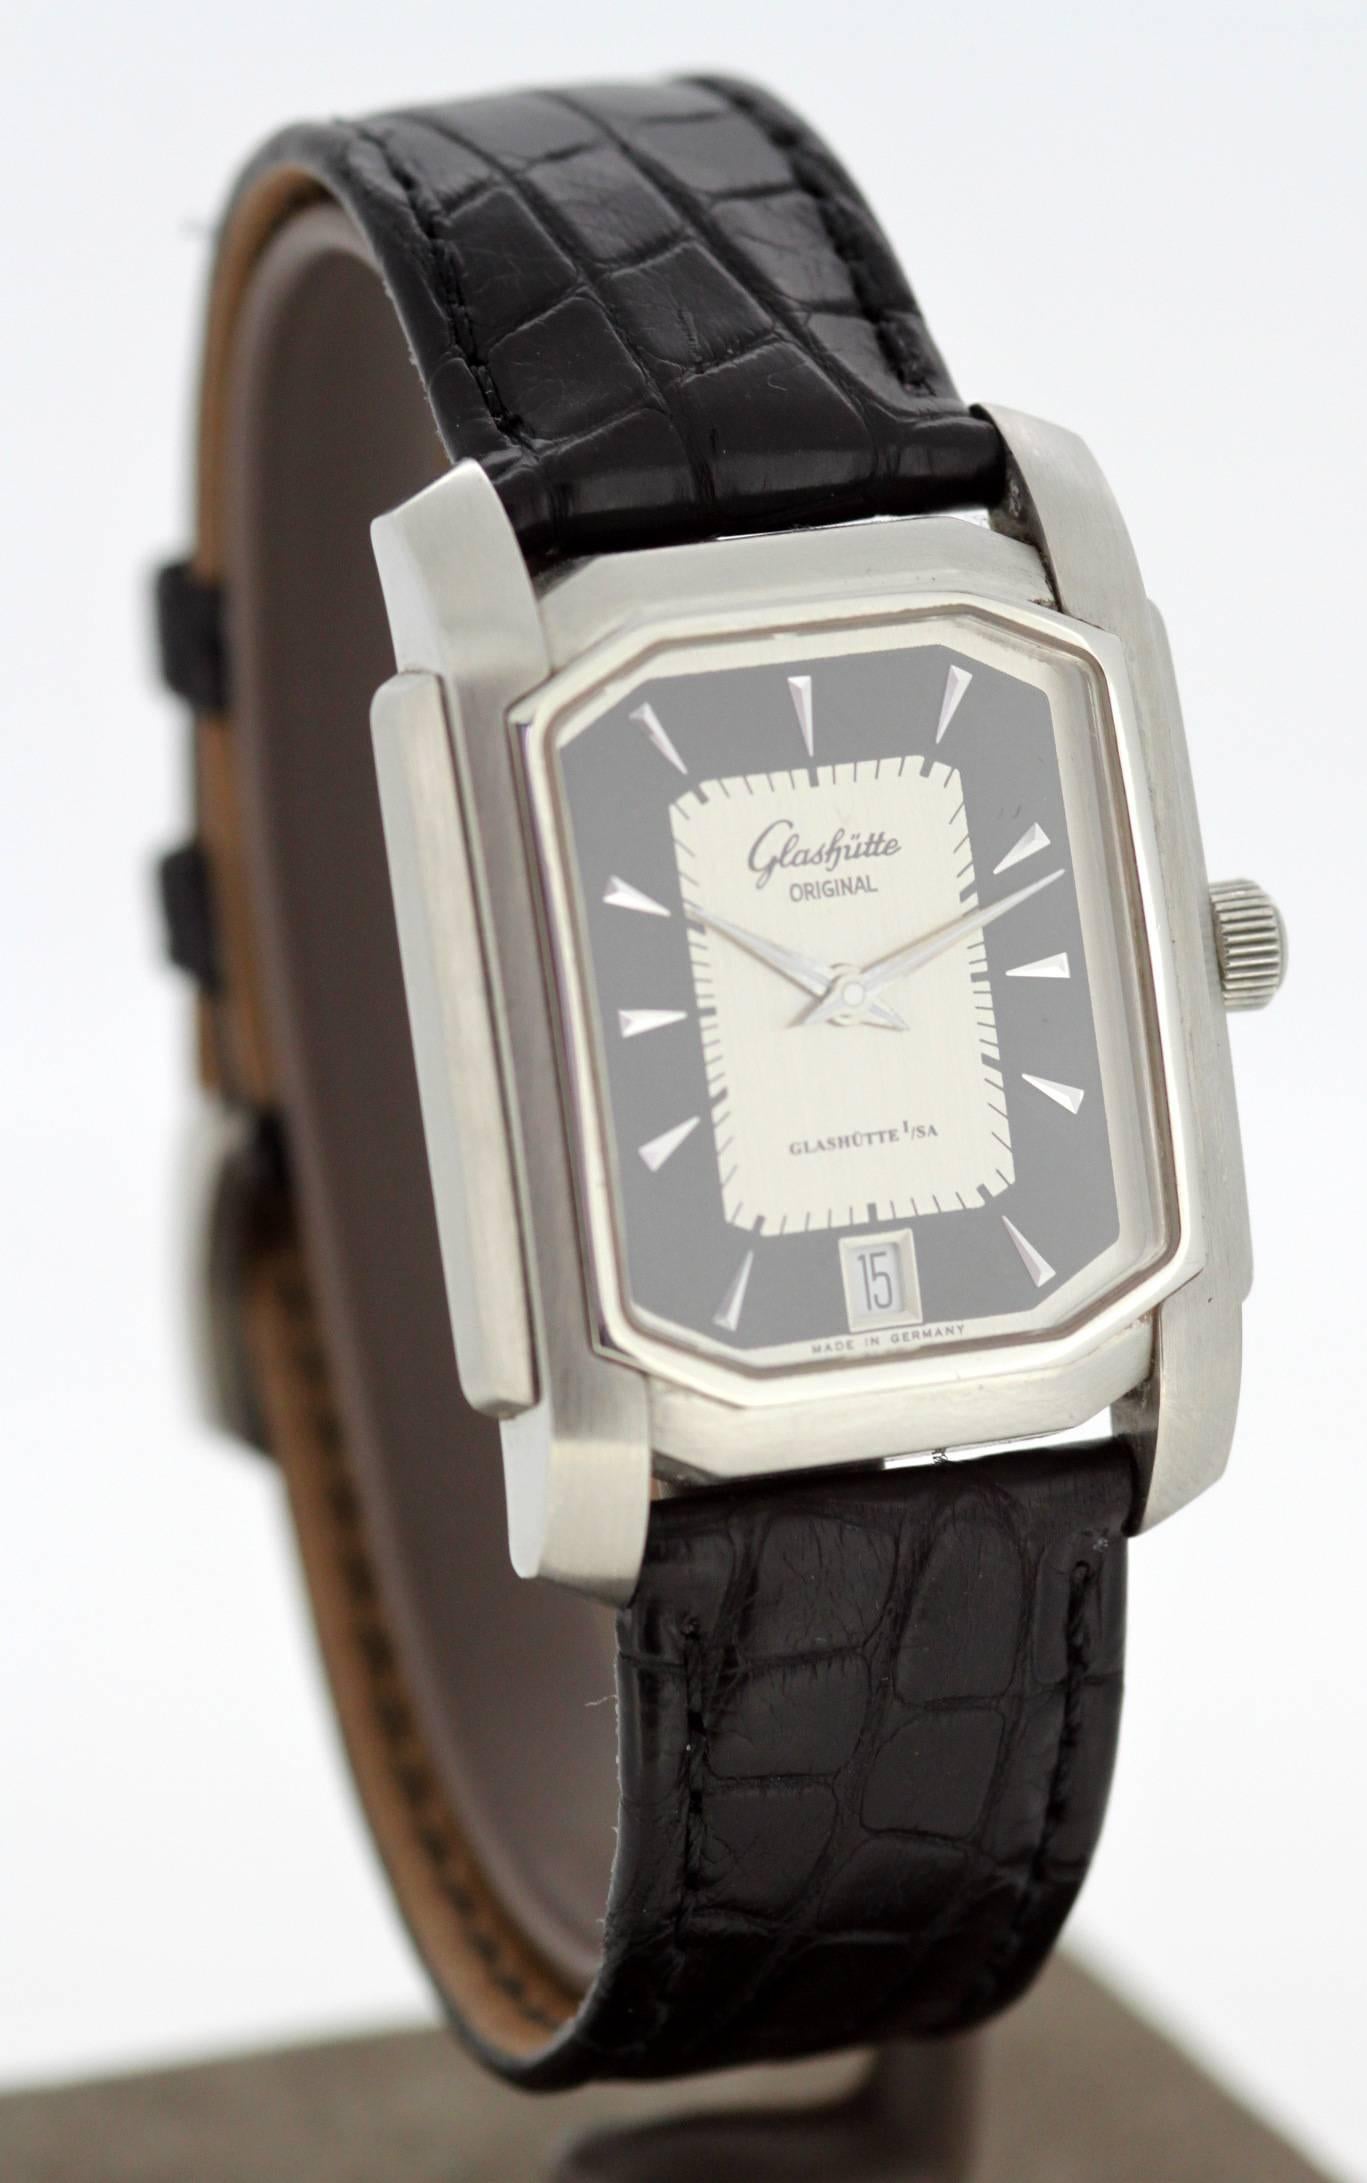 Glashutte Original 1/SA Stainless Steel Watch

Gender: Mens
Approx Case size: 42 x 33.5 mm
Movement: Automatic
Watchband Material: Leather
Case material : Steel
Display Type:	Analogue
Dial: Black and Grey ( See Photos )
Hands: Steel & Luminous
Clasp